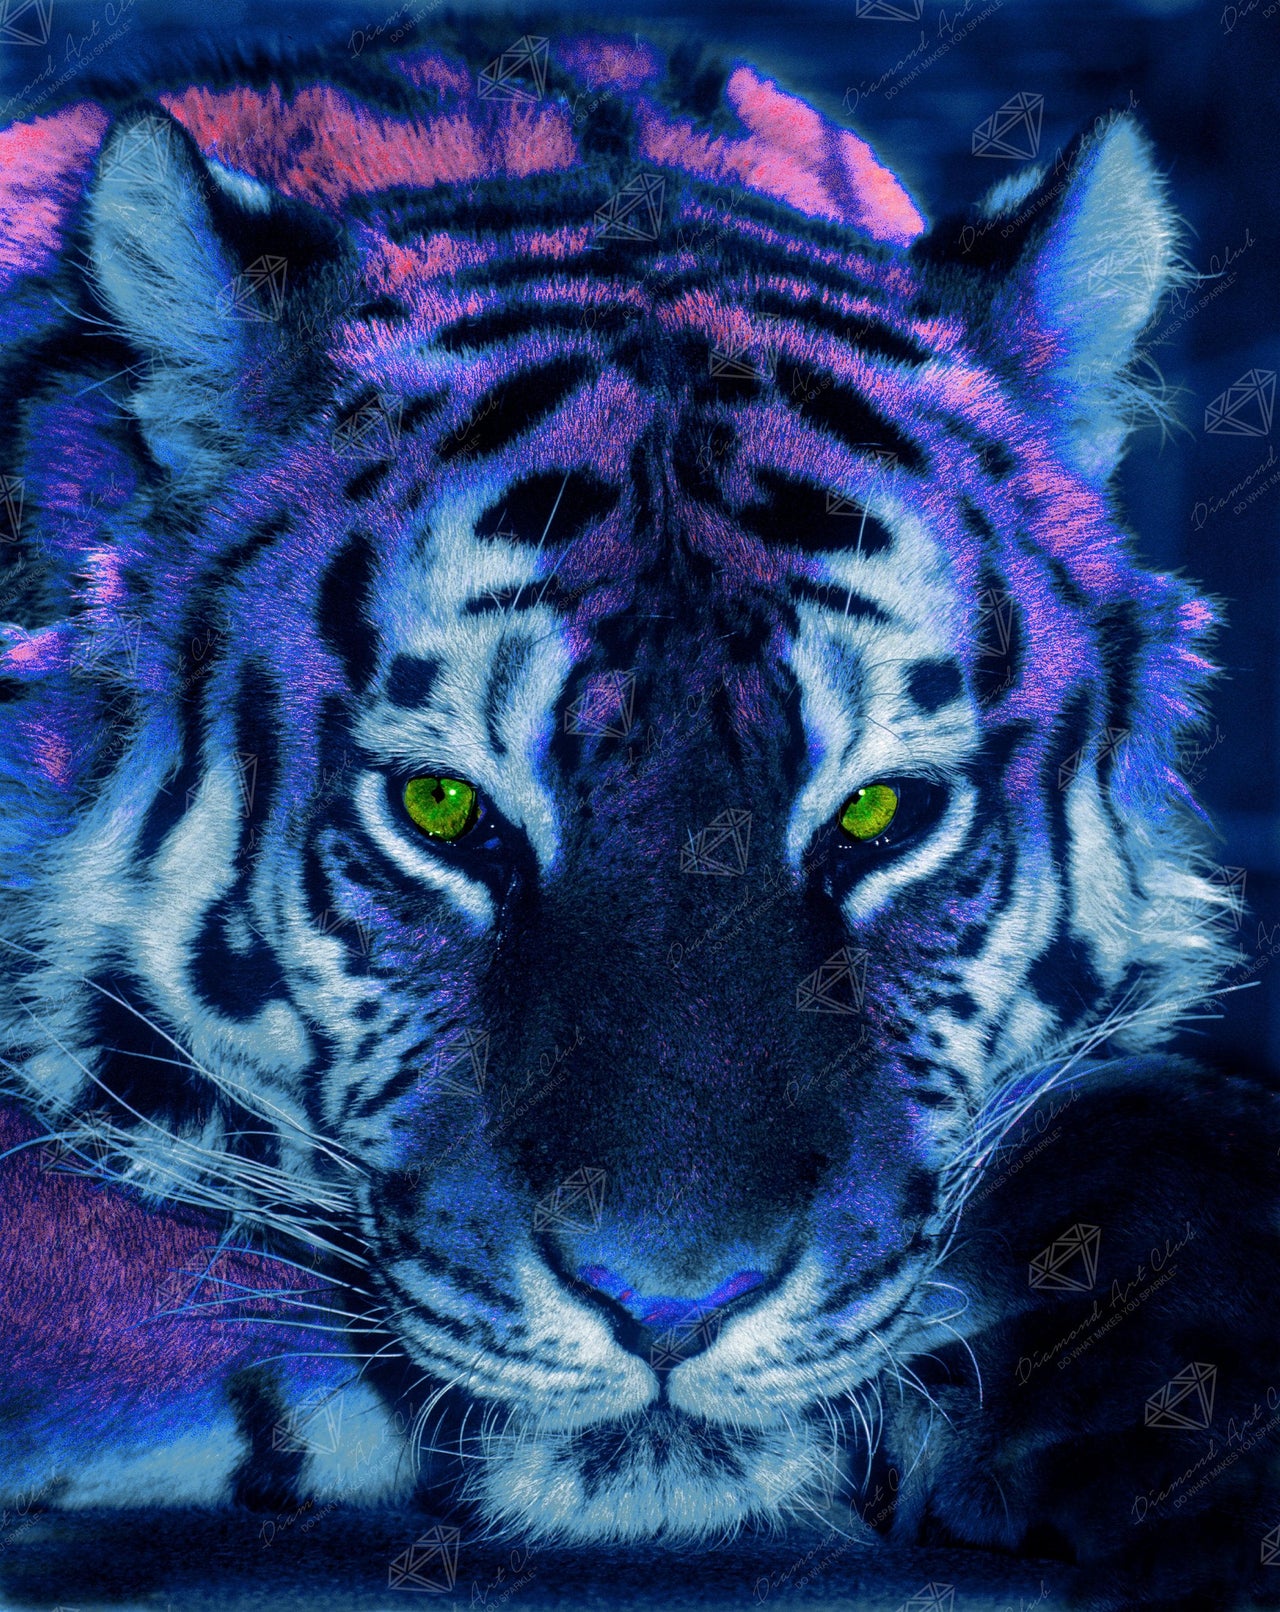 Diamond Painting The Tiger's Stare 20" x 25" (50.7cm x 63.9cm) / Round with 35 Colors including 4 ABs / 41,268